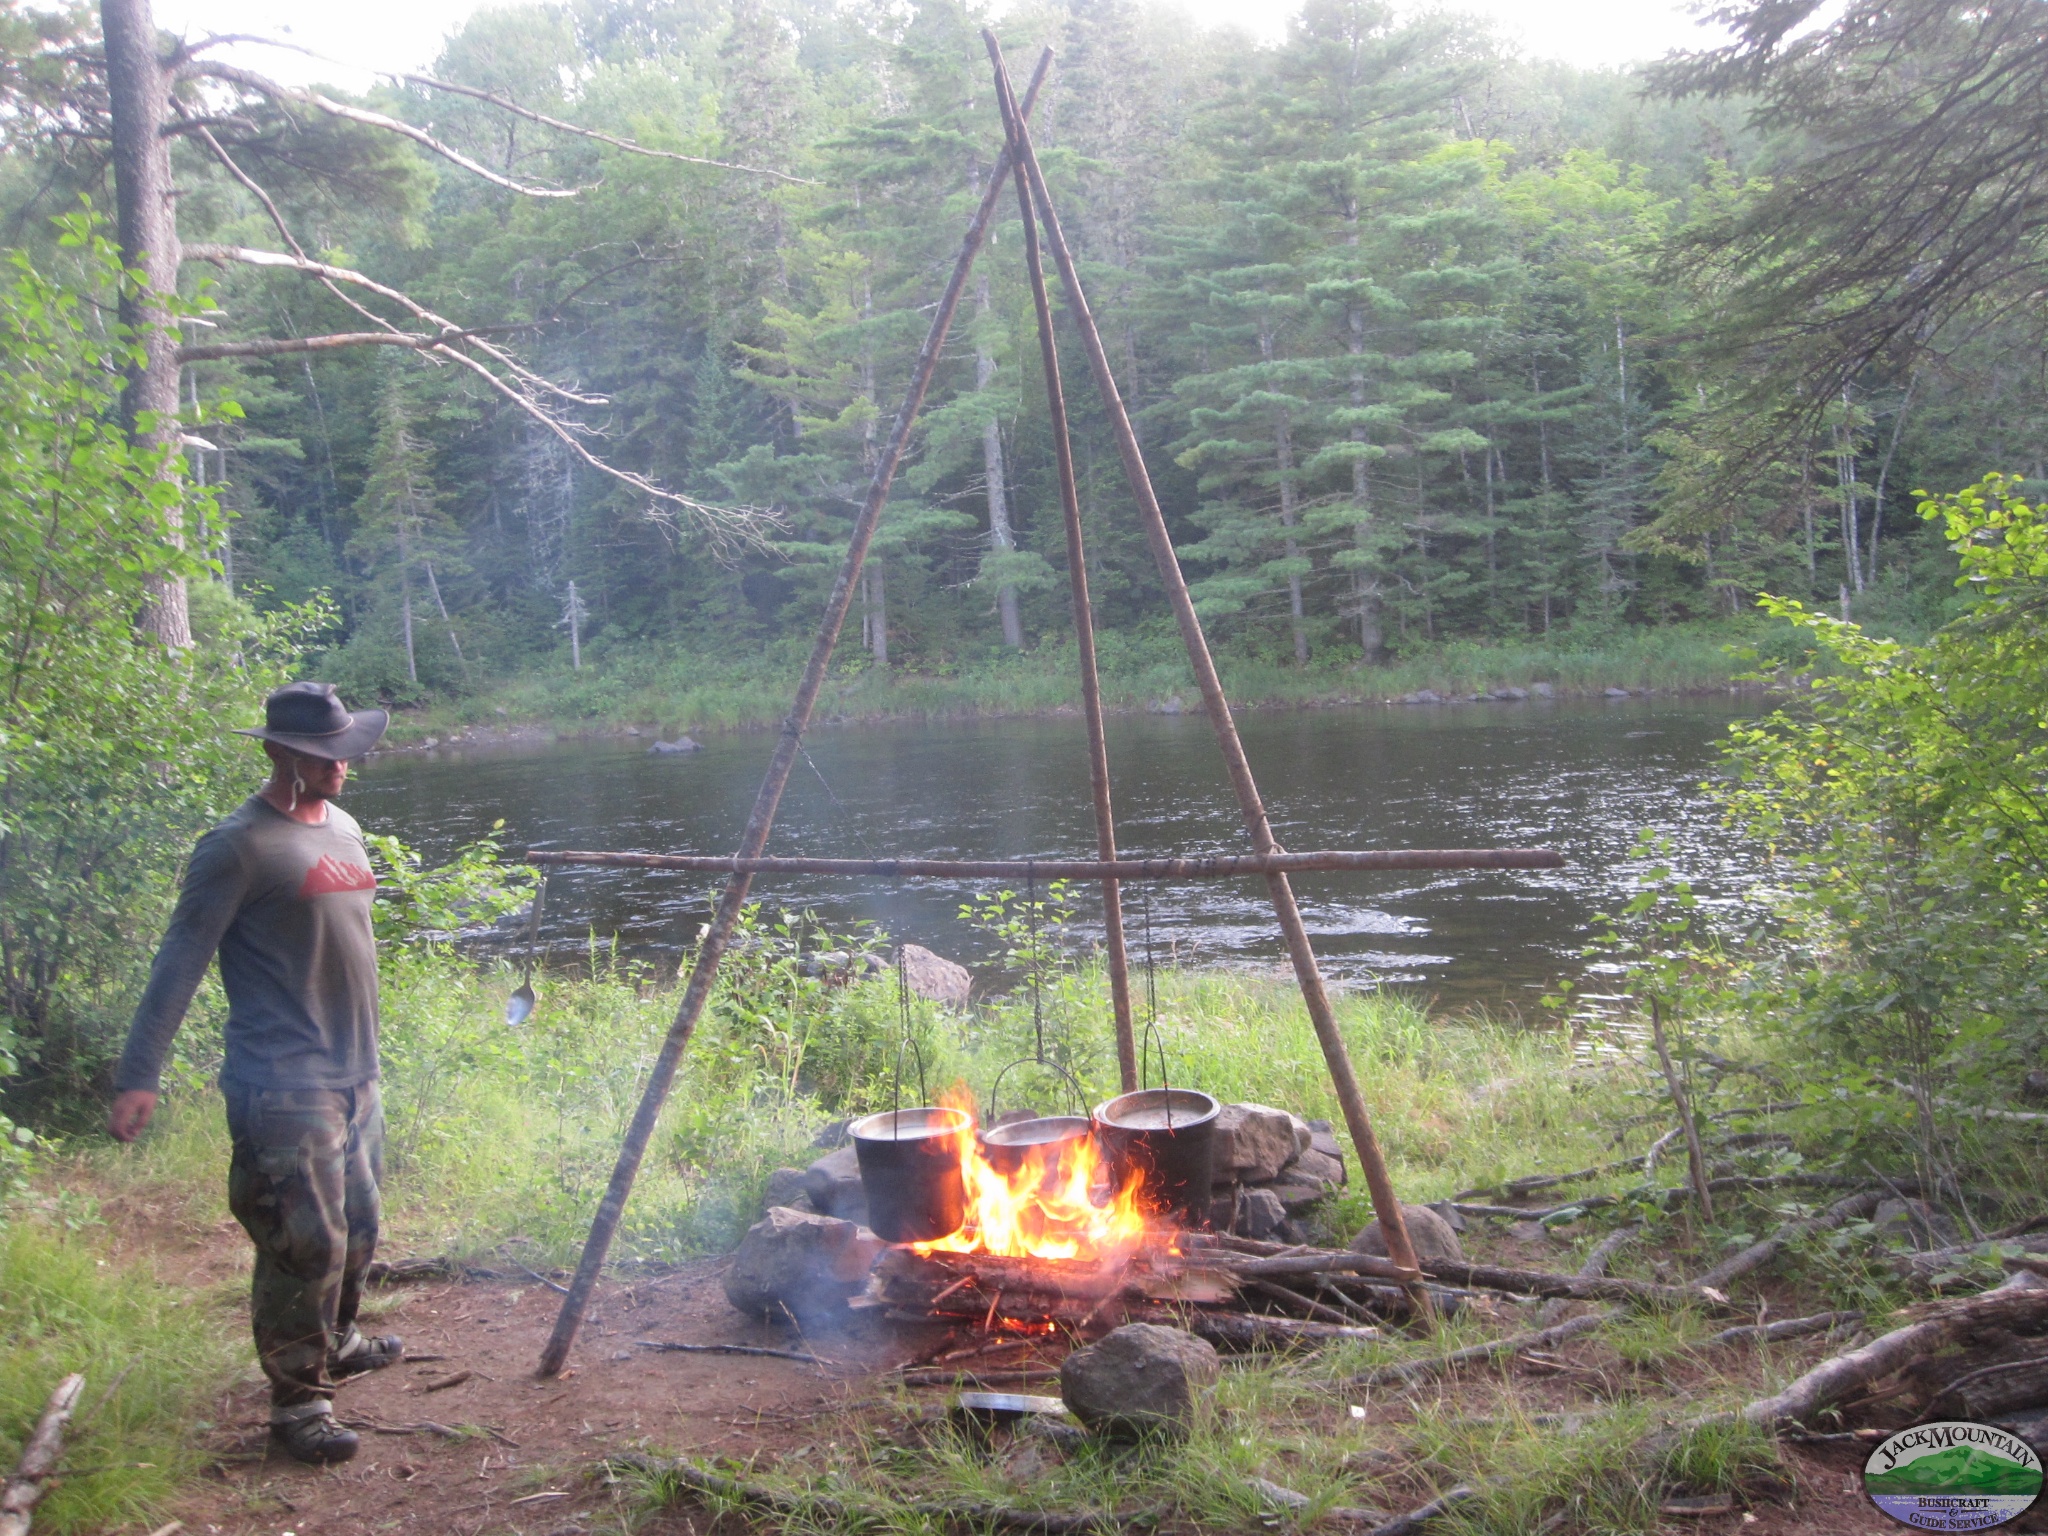 Cooking Dinner On The East Branch